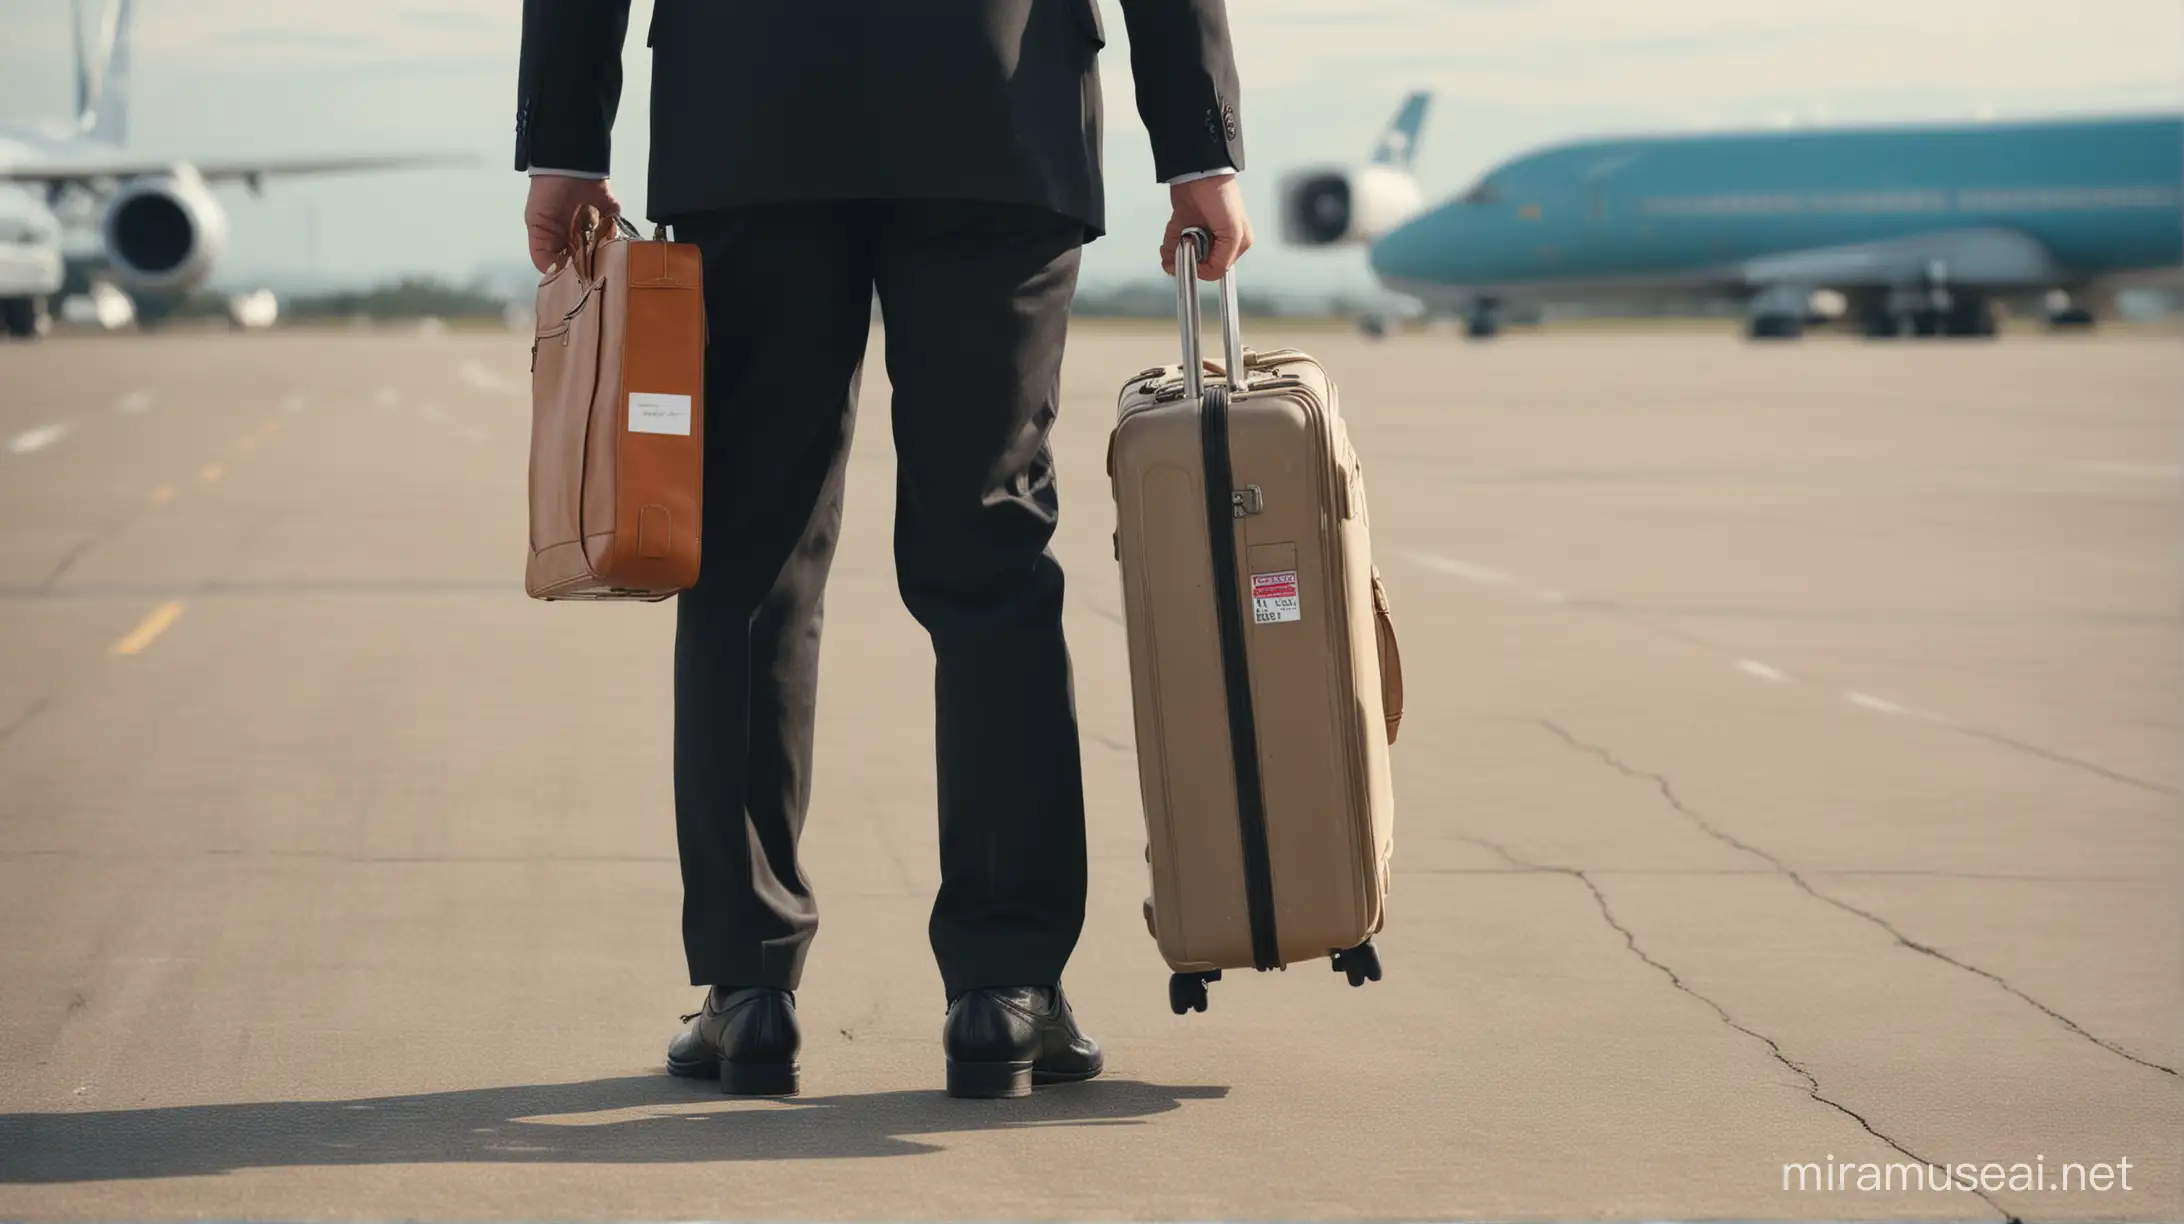 Business Traveler with Luggage Approaching Airplane